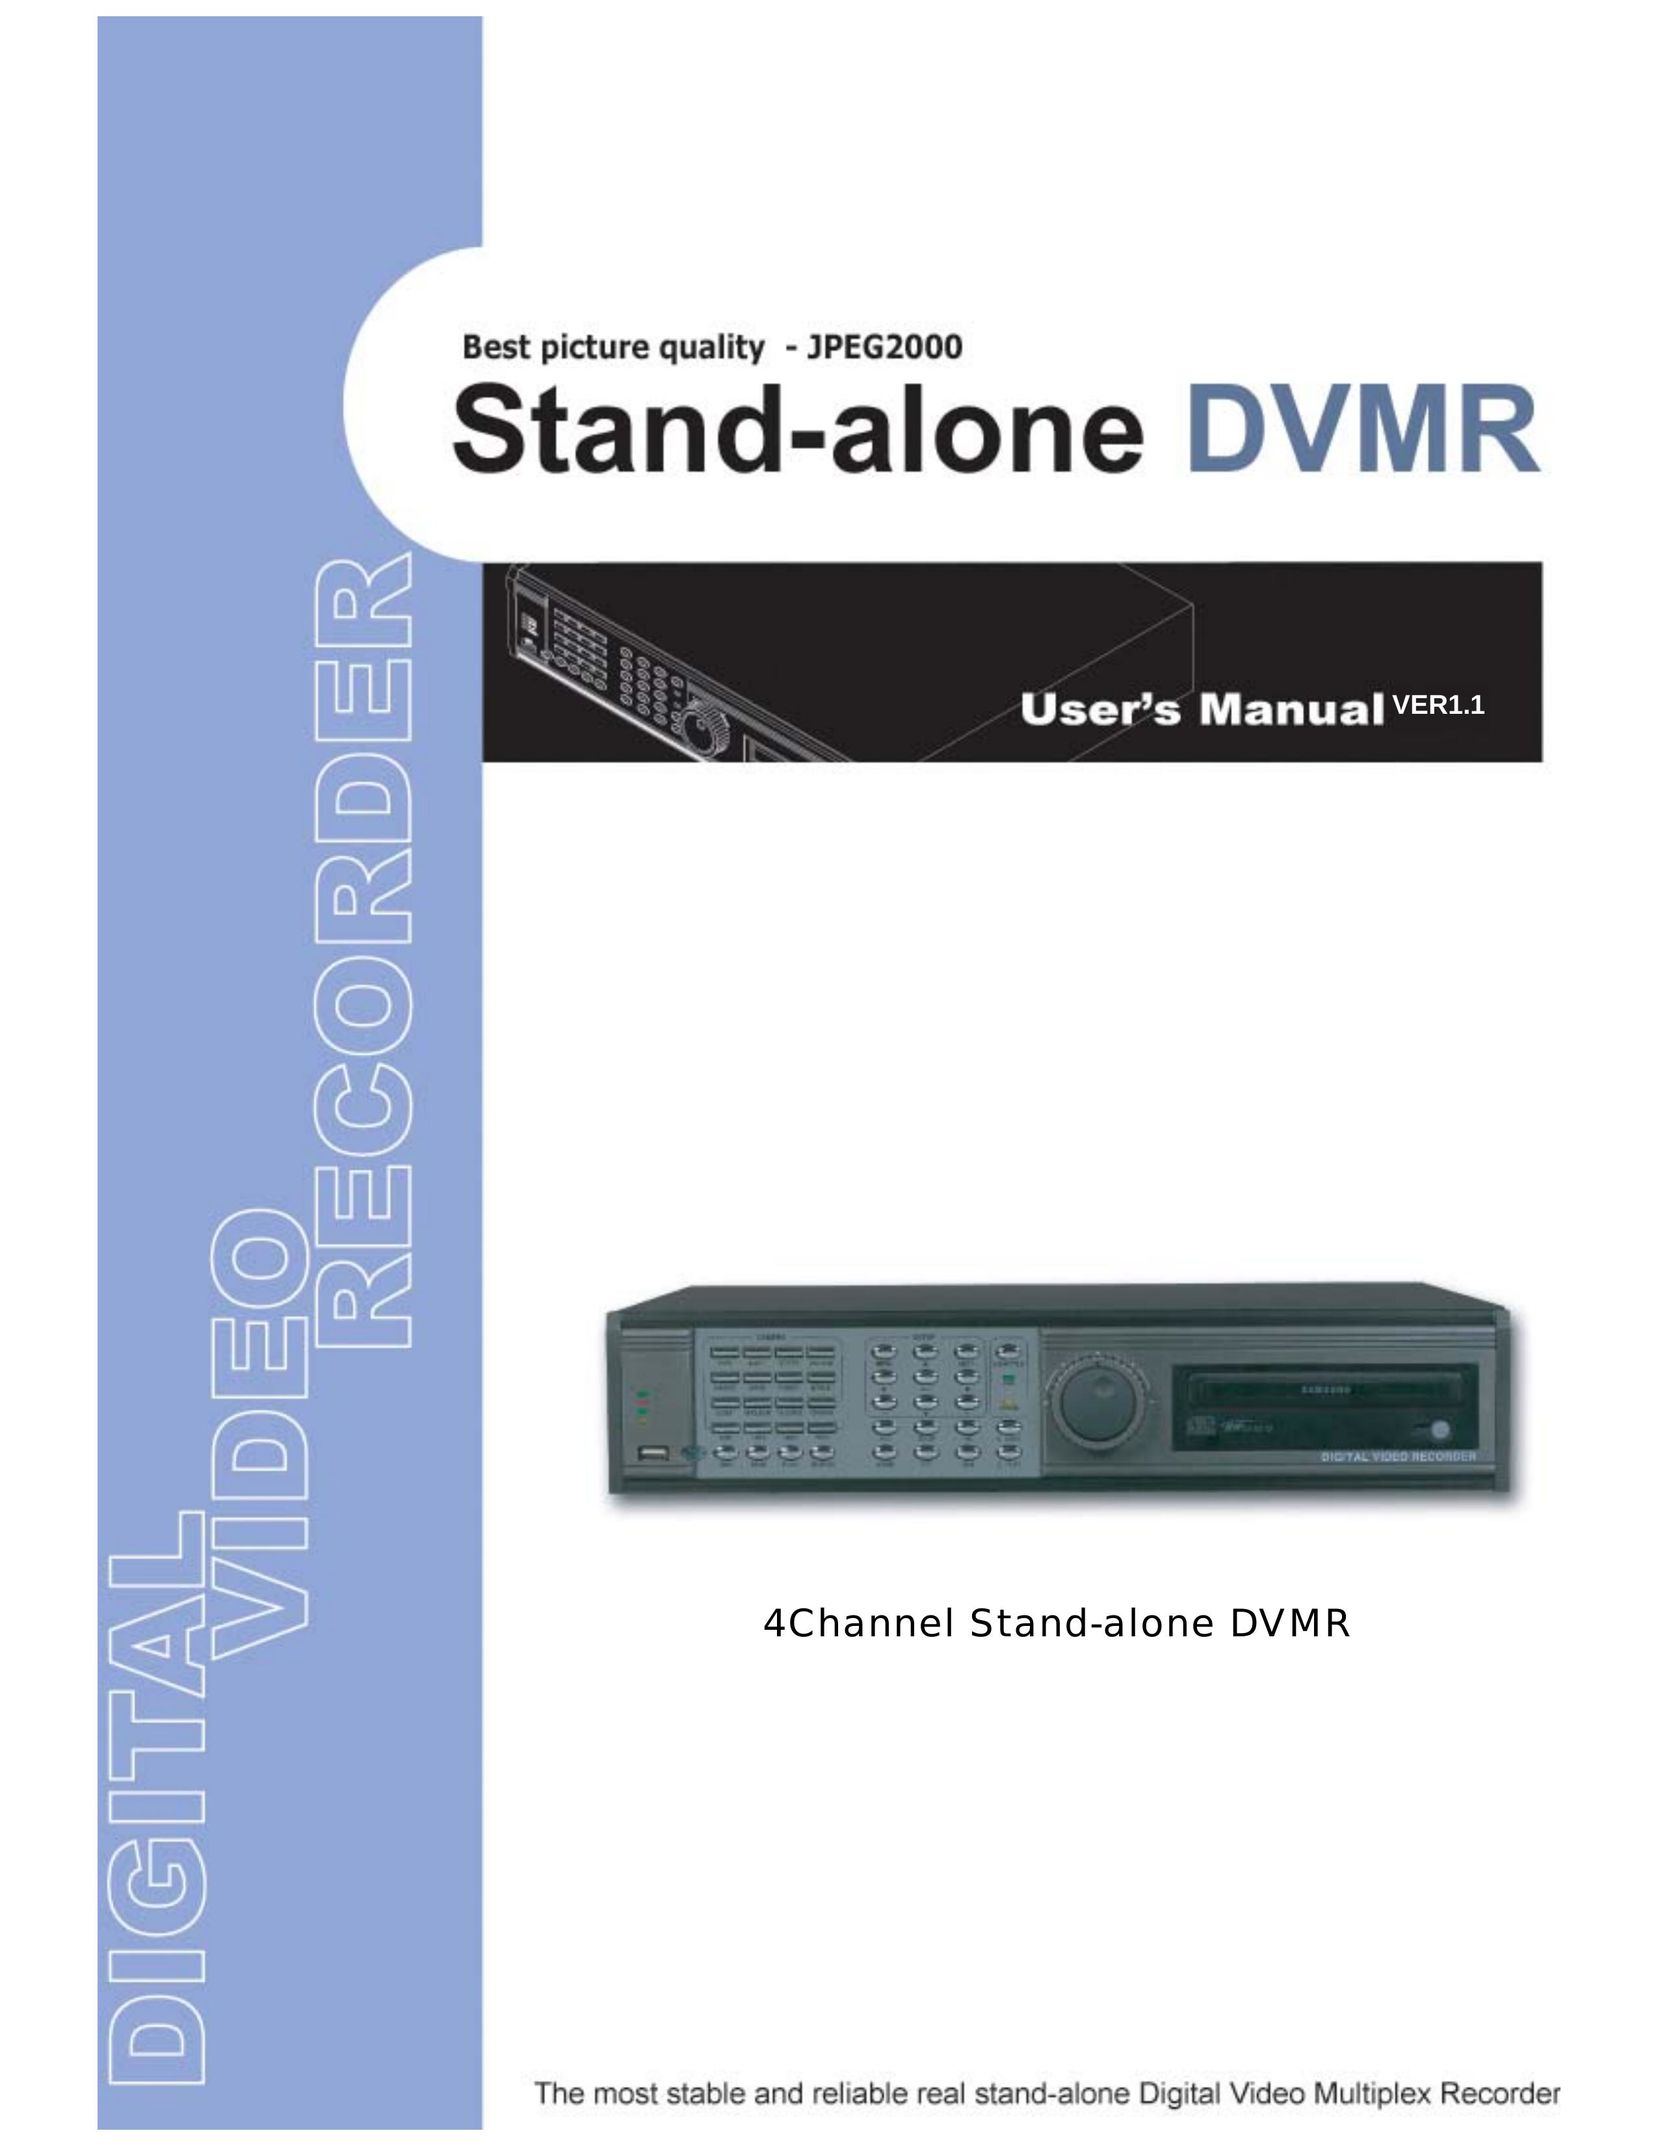 Maxtor 4Channel Stand-alone DVMR DVR User Manual